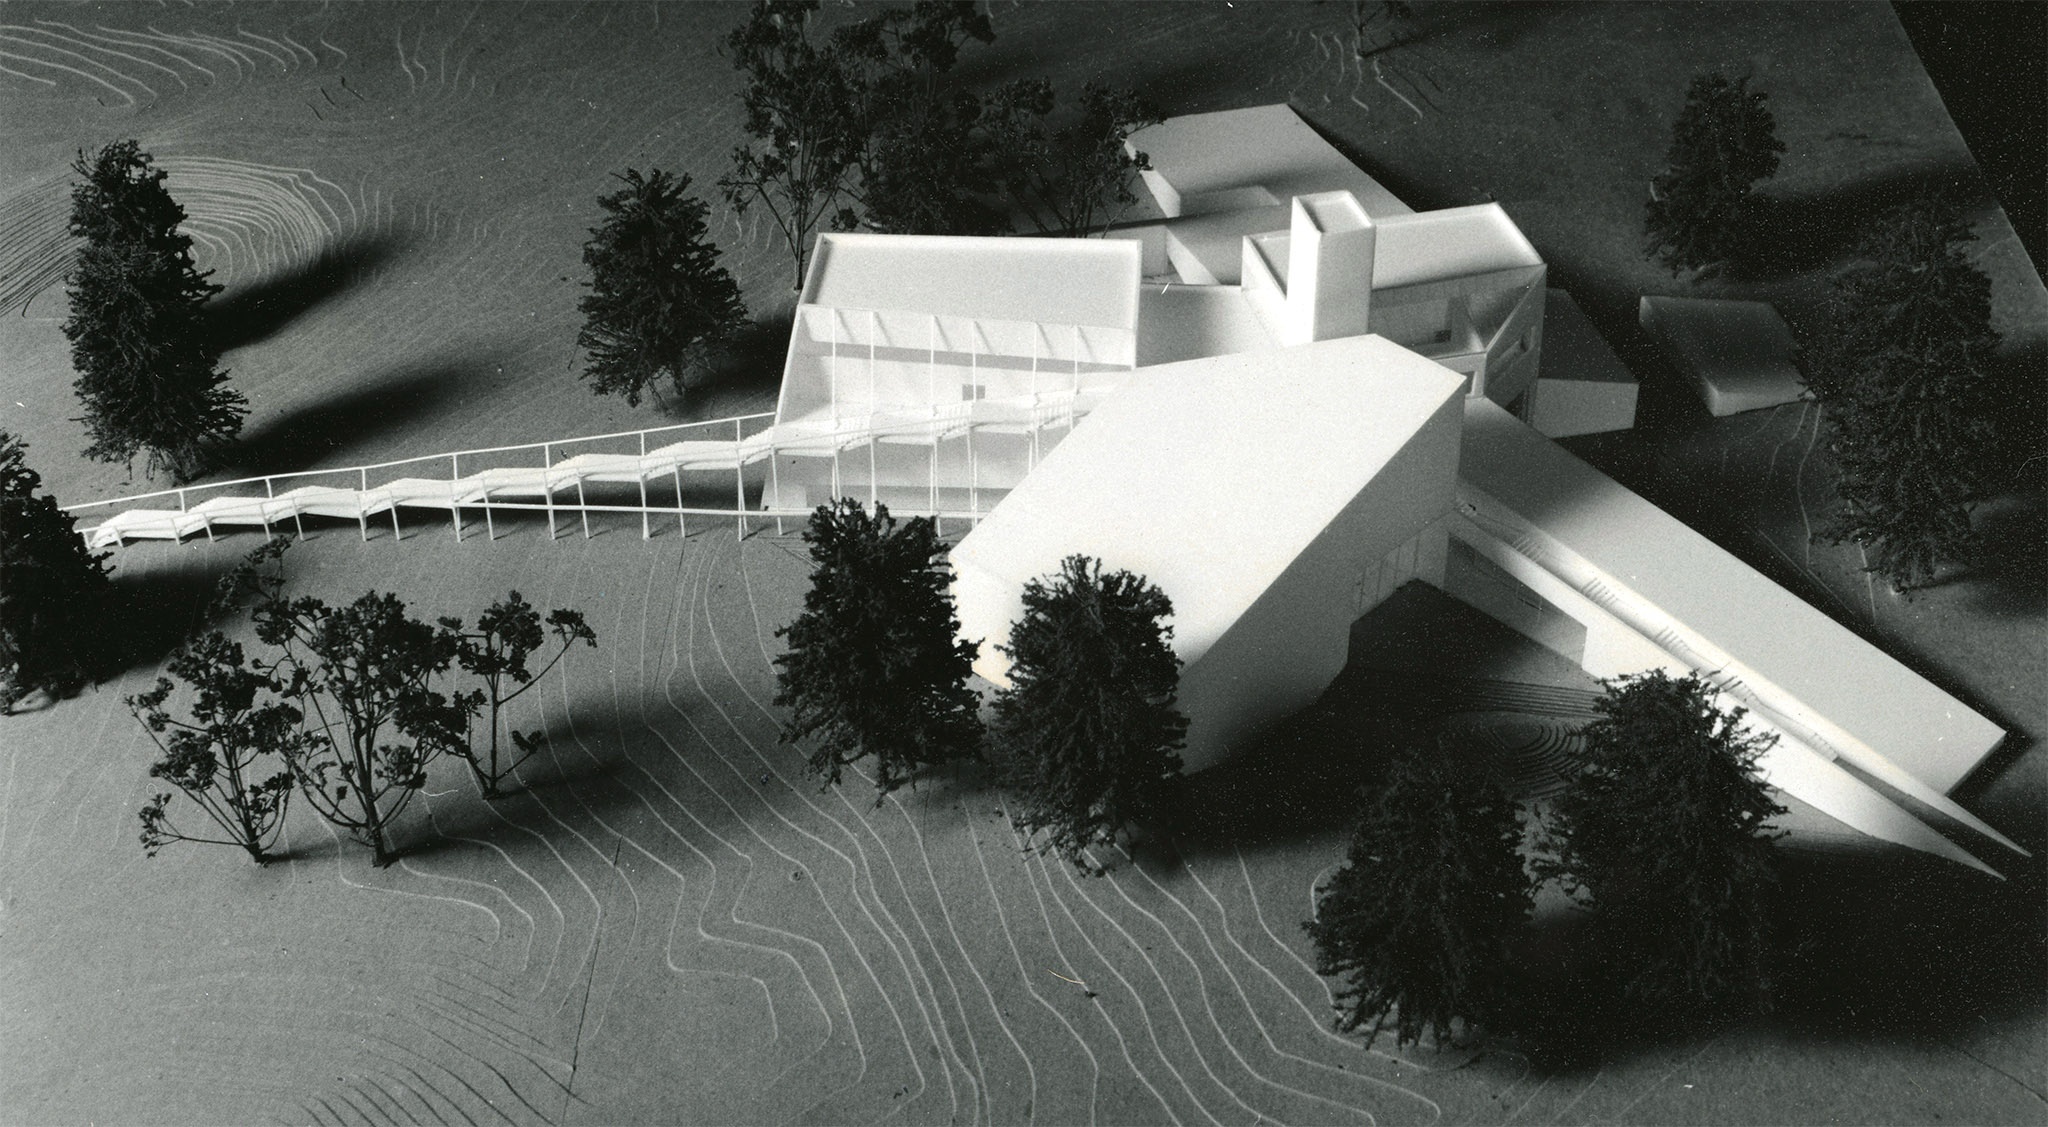 A black and white, side-aerial photograph of a small, white, model of an angular building surrounded by fake trees.